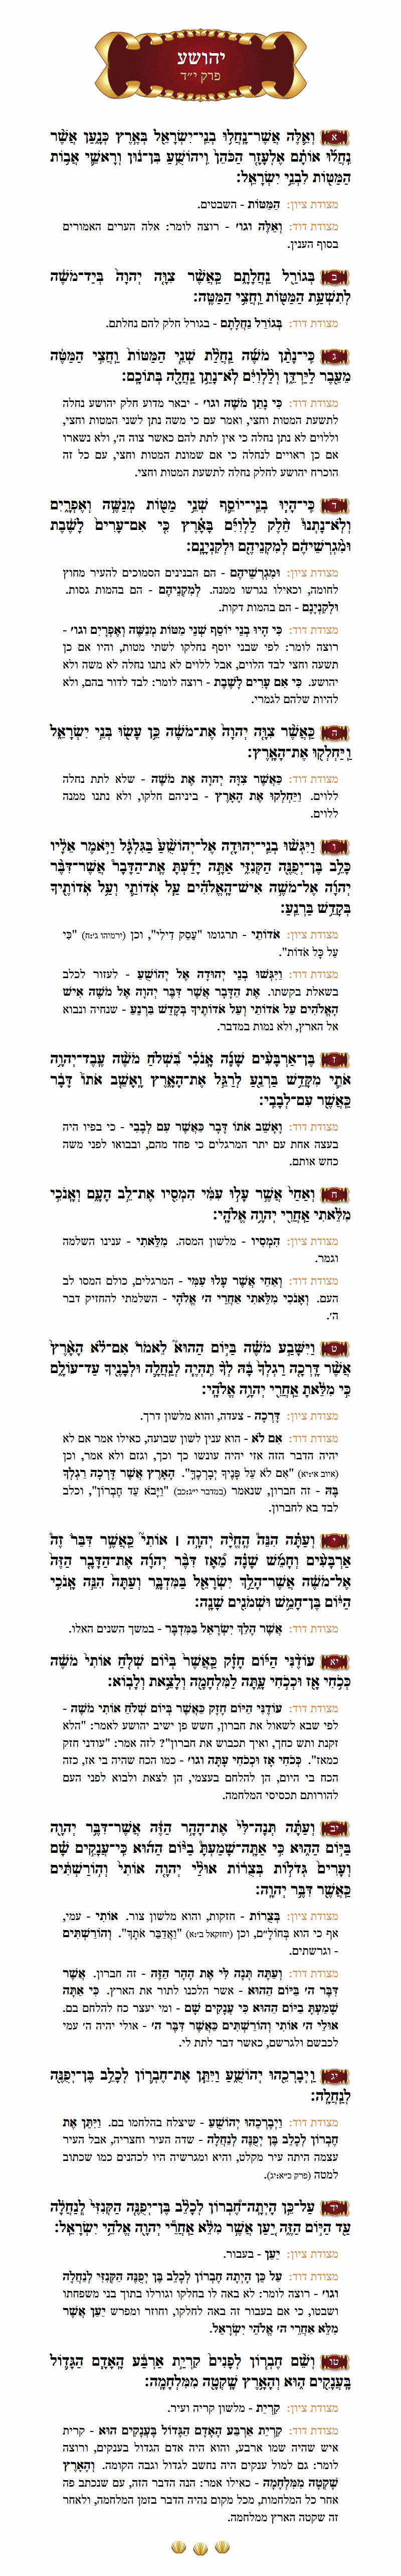 Sefer Yehoshua Chapter 14 with commentary